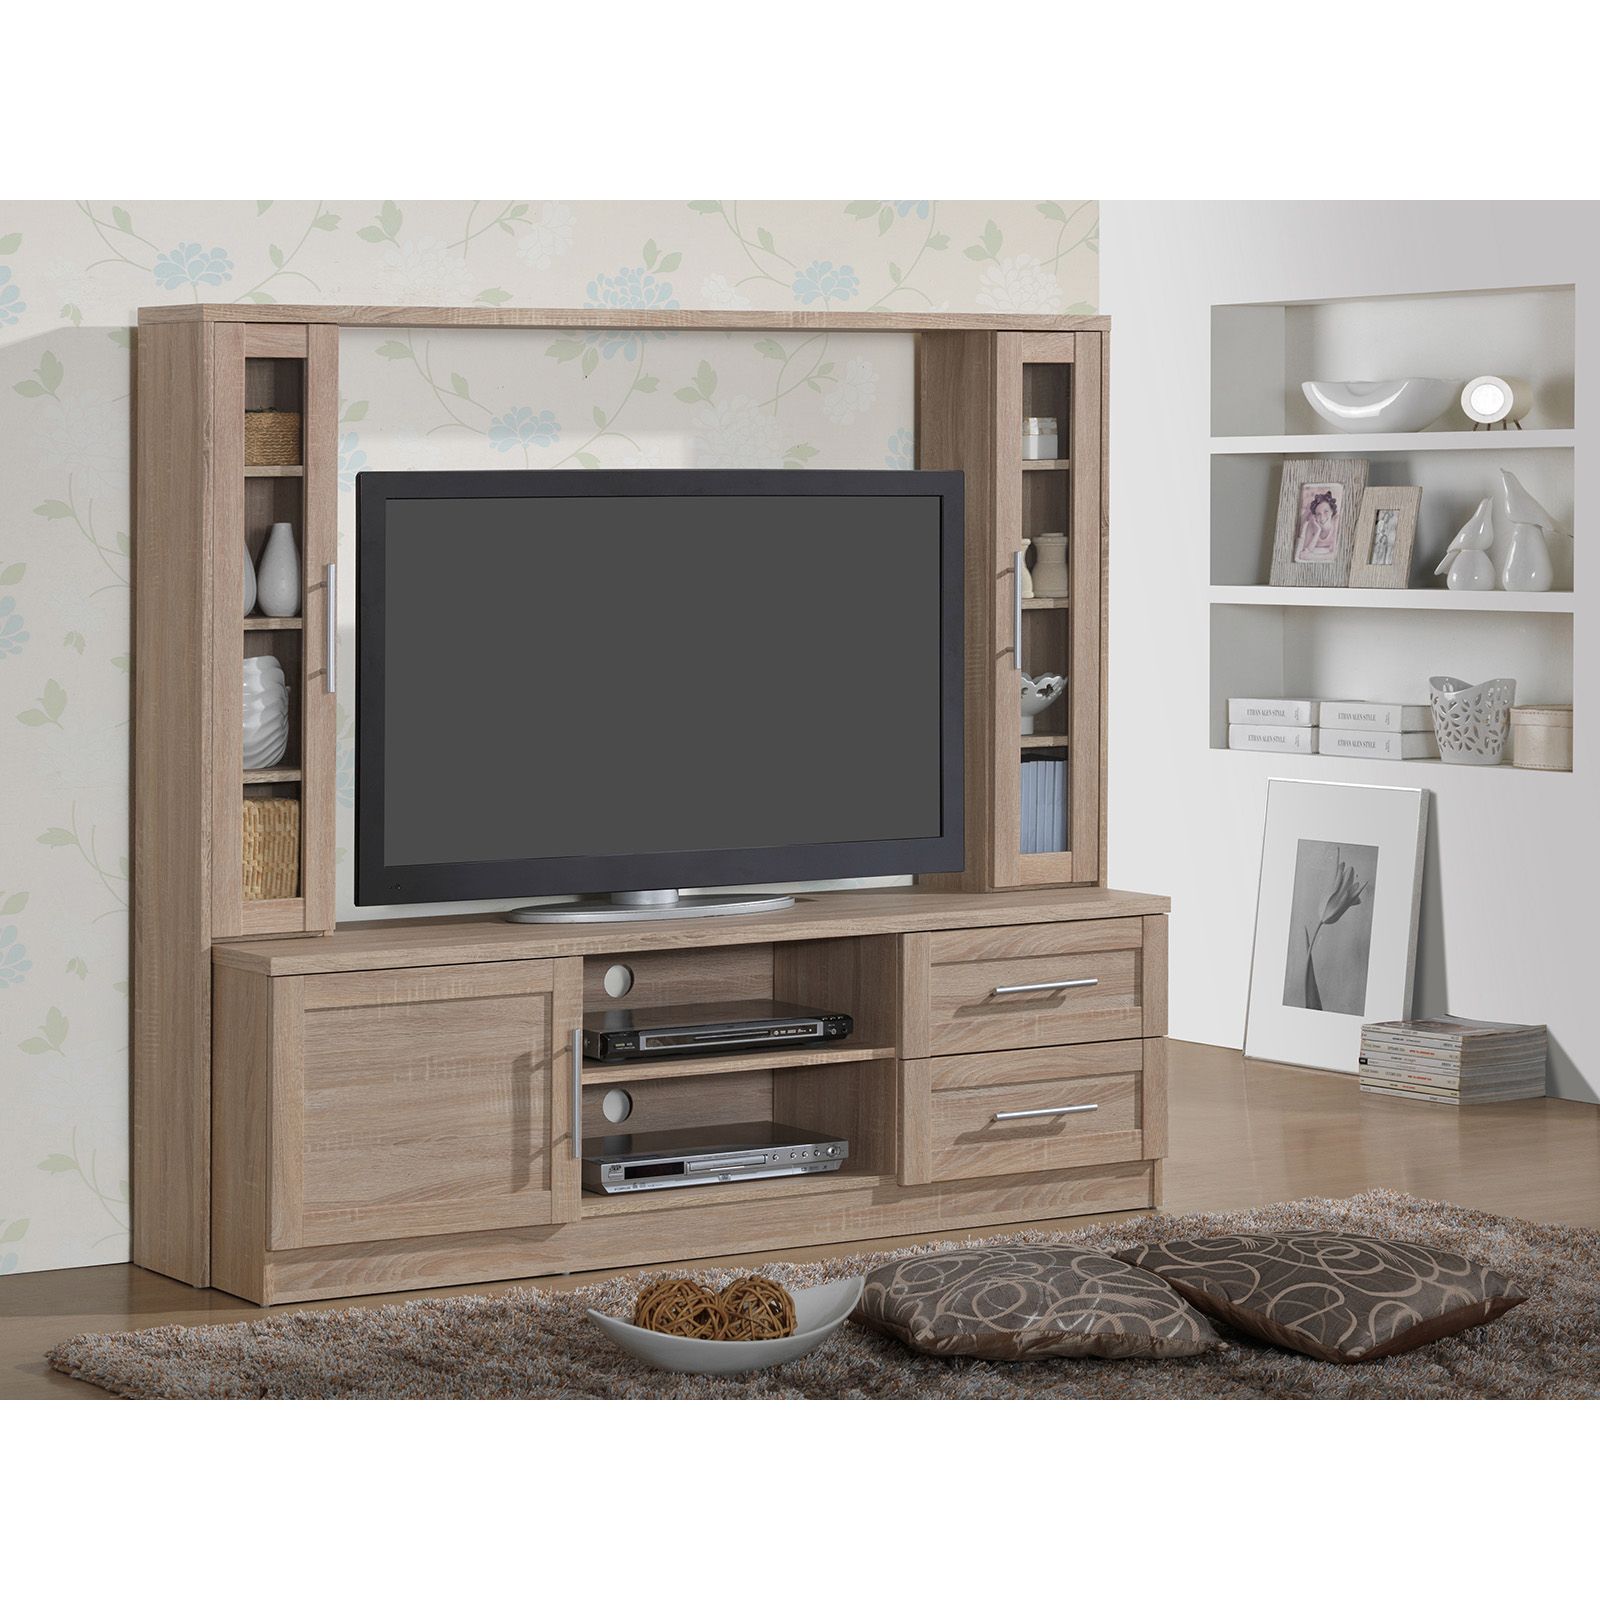 Techni Mobili Entertainment Center With Storage – Sand Pertaining To Big Lots Tv Stands (View 15 of 15)